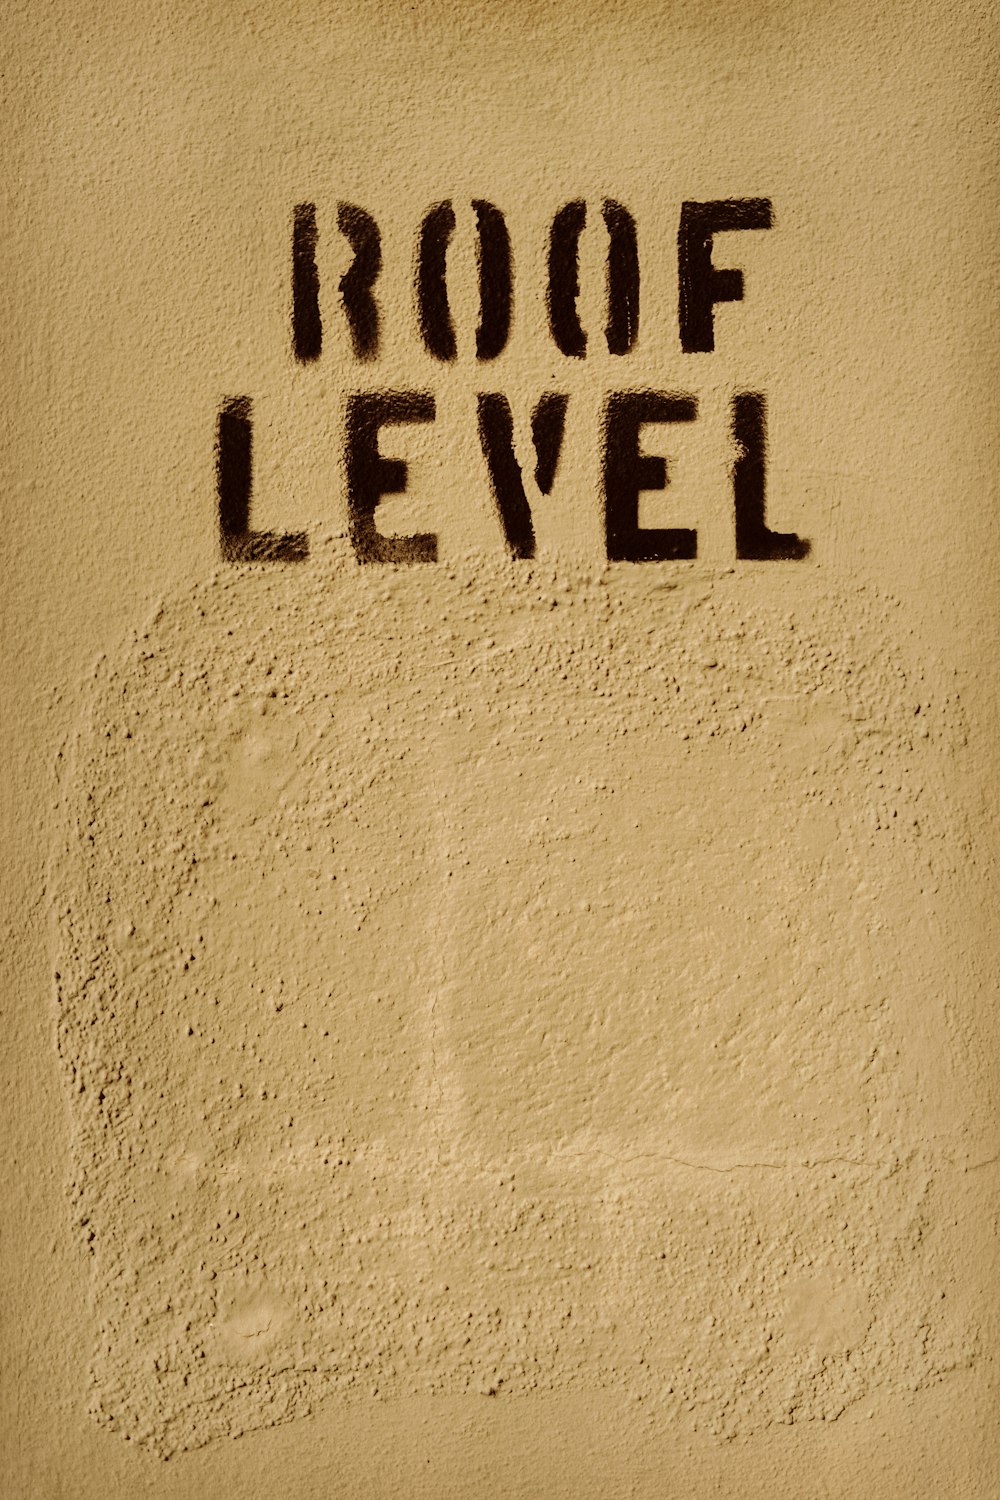 the word roof level written on a wall